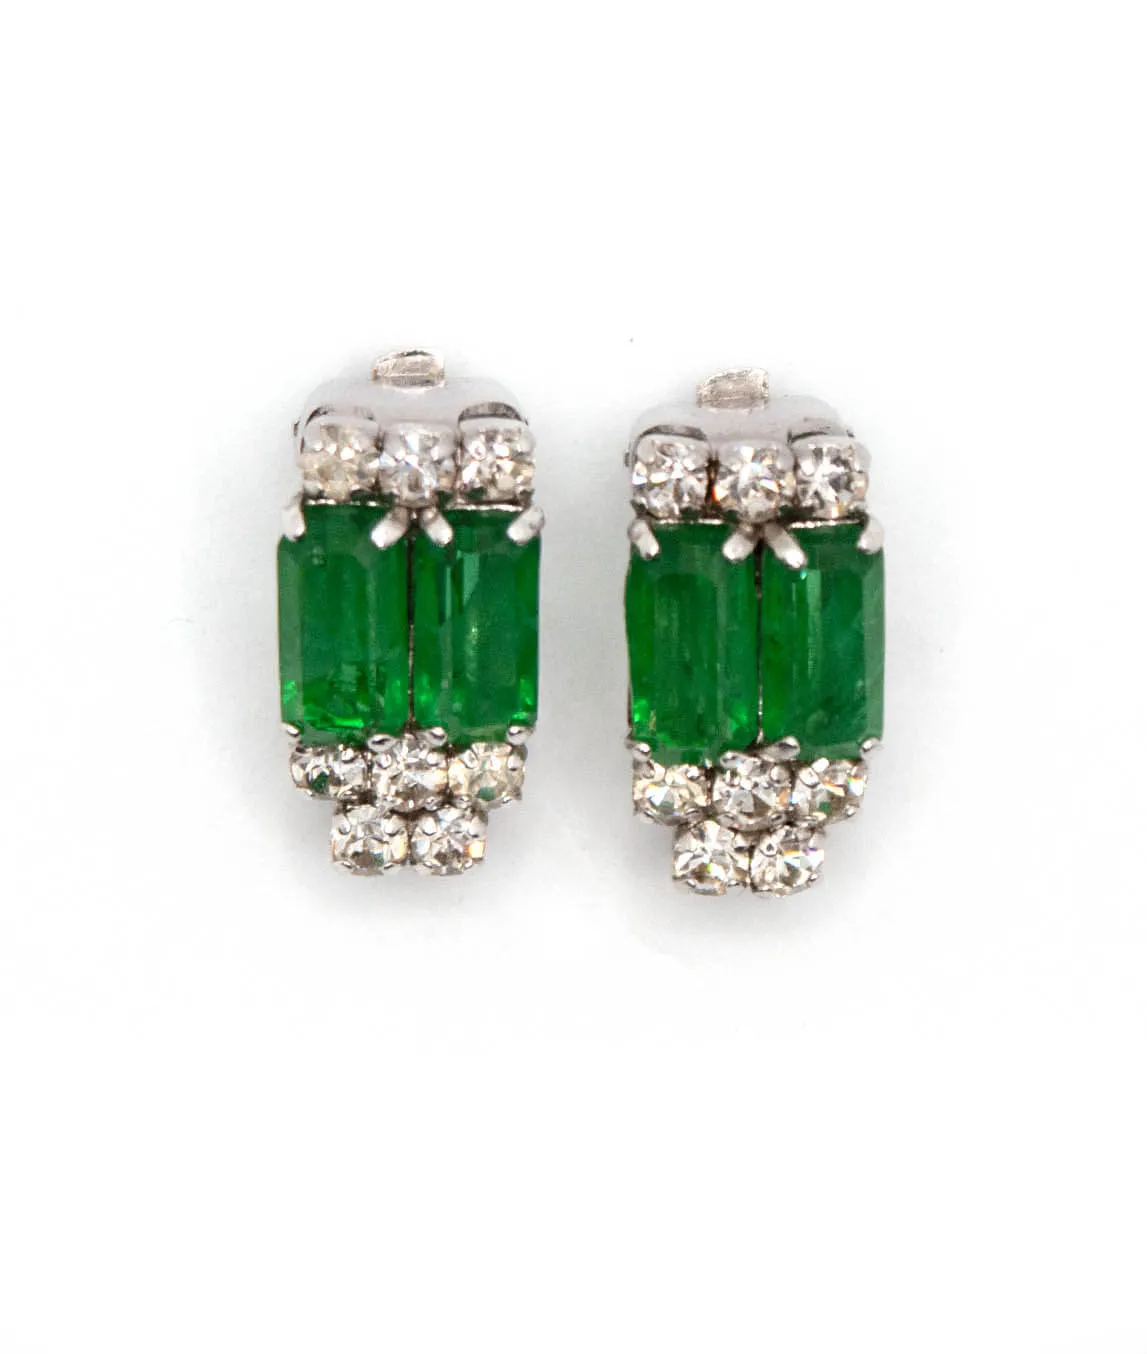 Christian Dior Emerald Green and clear paste earrings 1970s